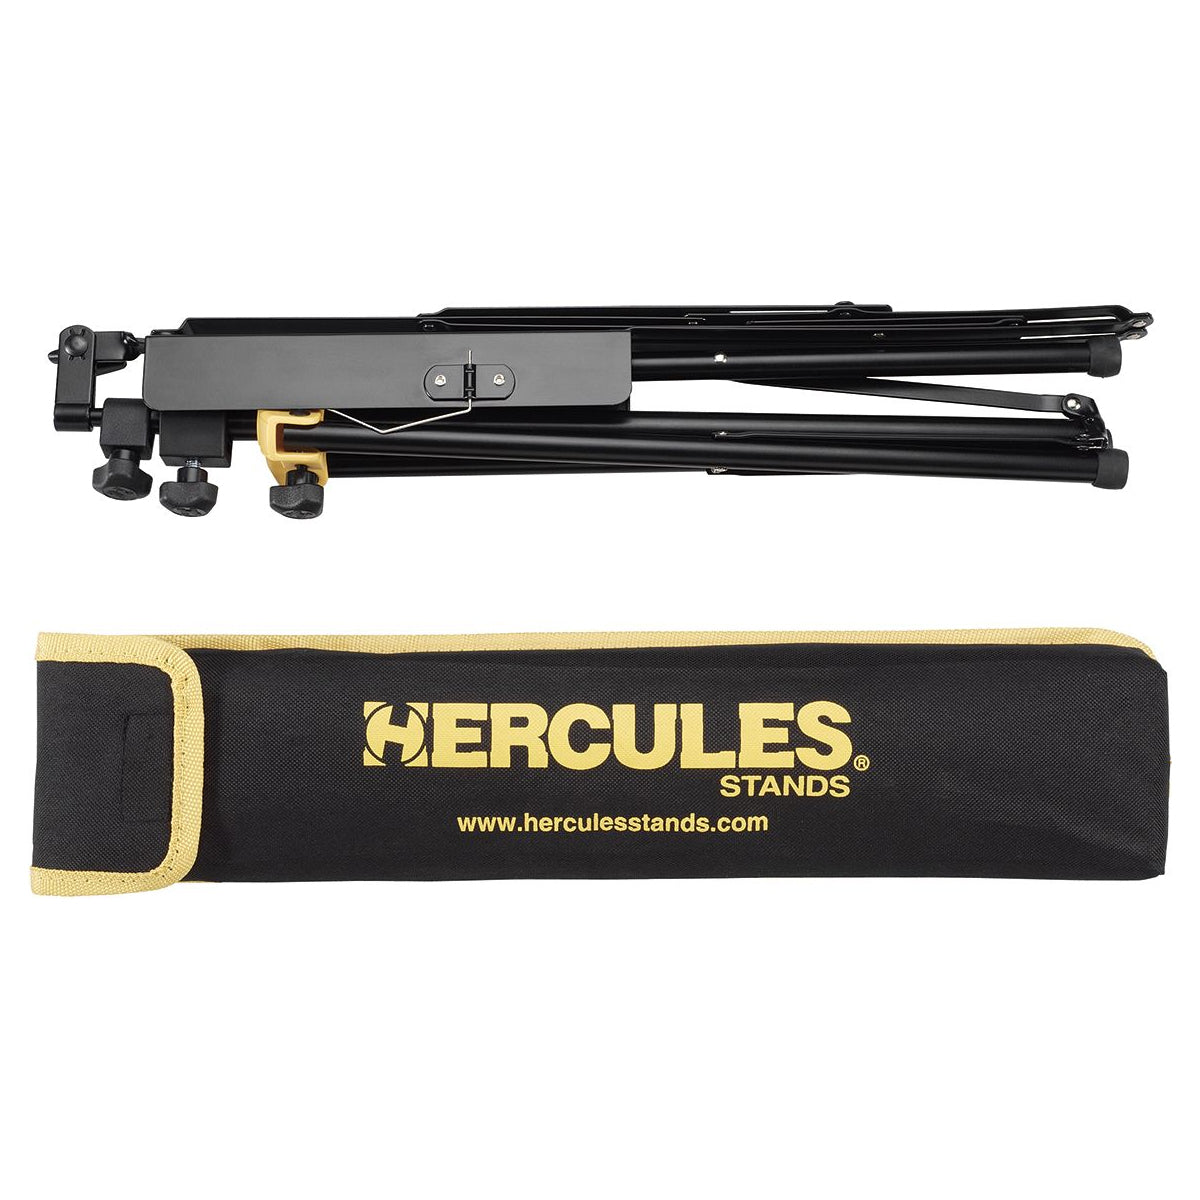 GS402BB + housse : Stands / Supports Hercules Stands 